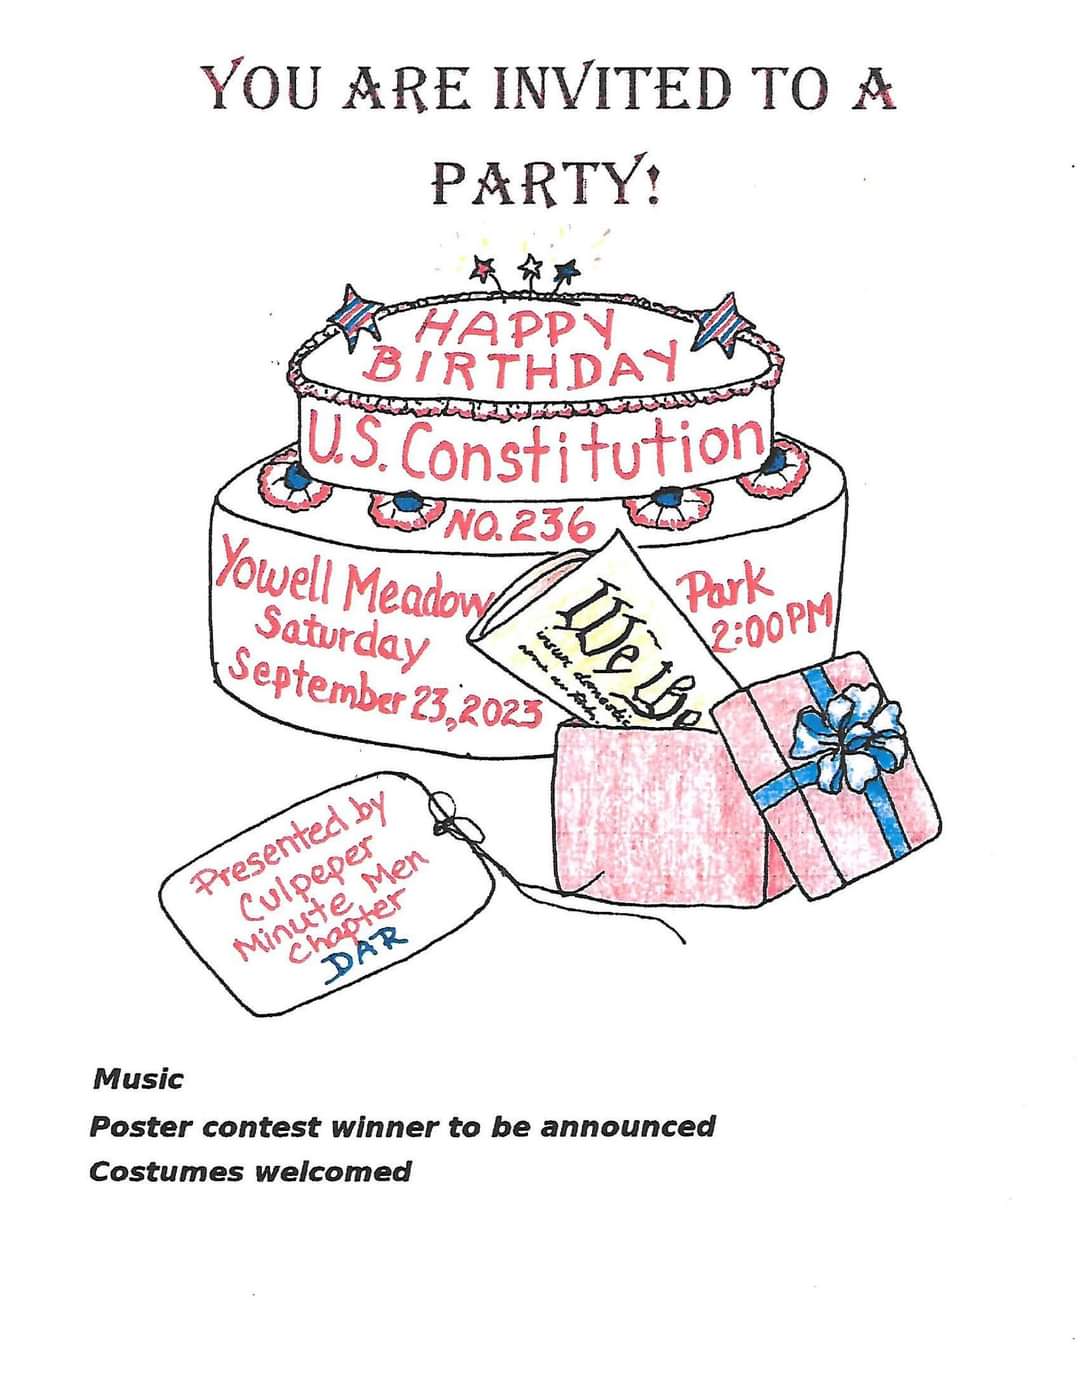 Happy 236th Birthday Party for the US Constitution